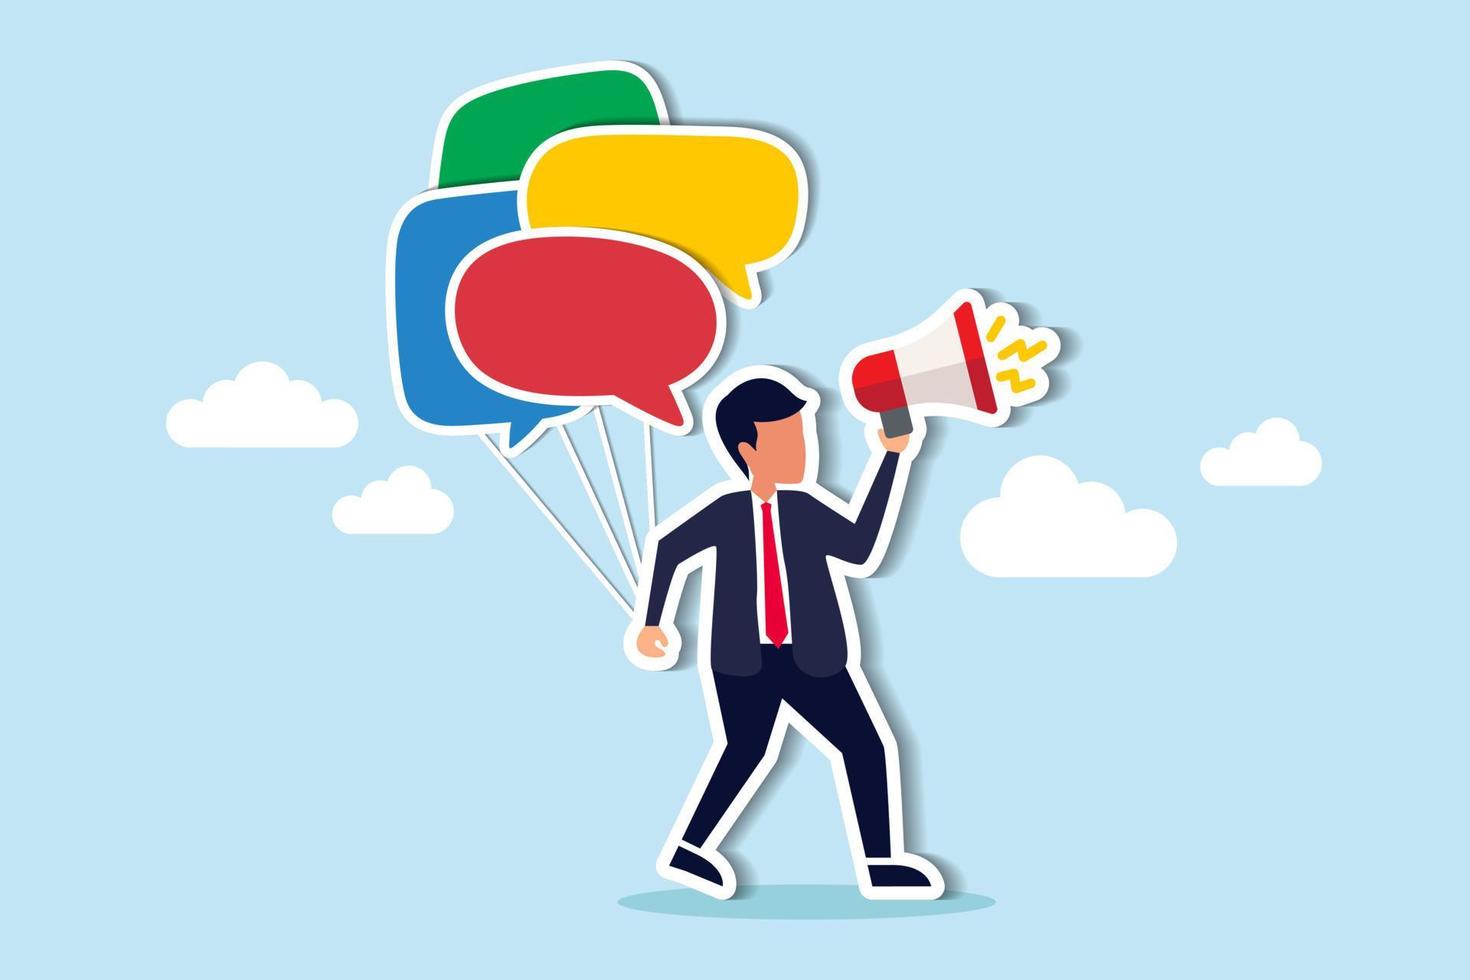 Communication or PR, Public Relations manager to communicate company information and media, announce sales or promotion concept, businessman holding speech bubble balloons while talking on megaphone vector